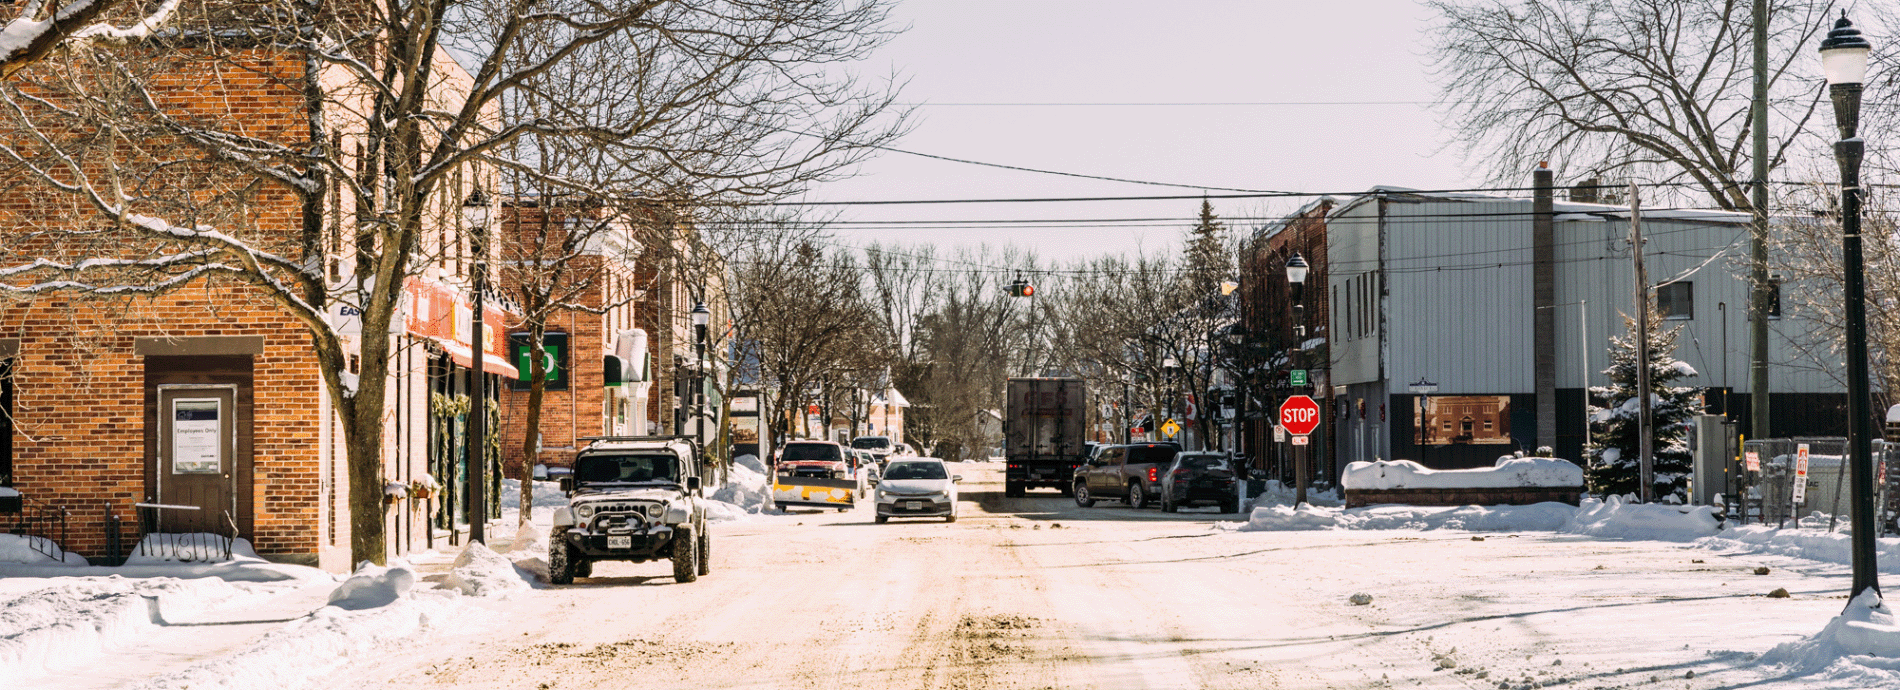 downtown Coldwater and a Severn snowplow